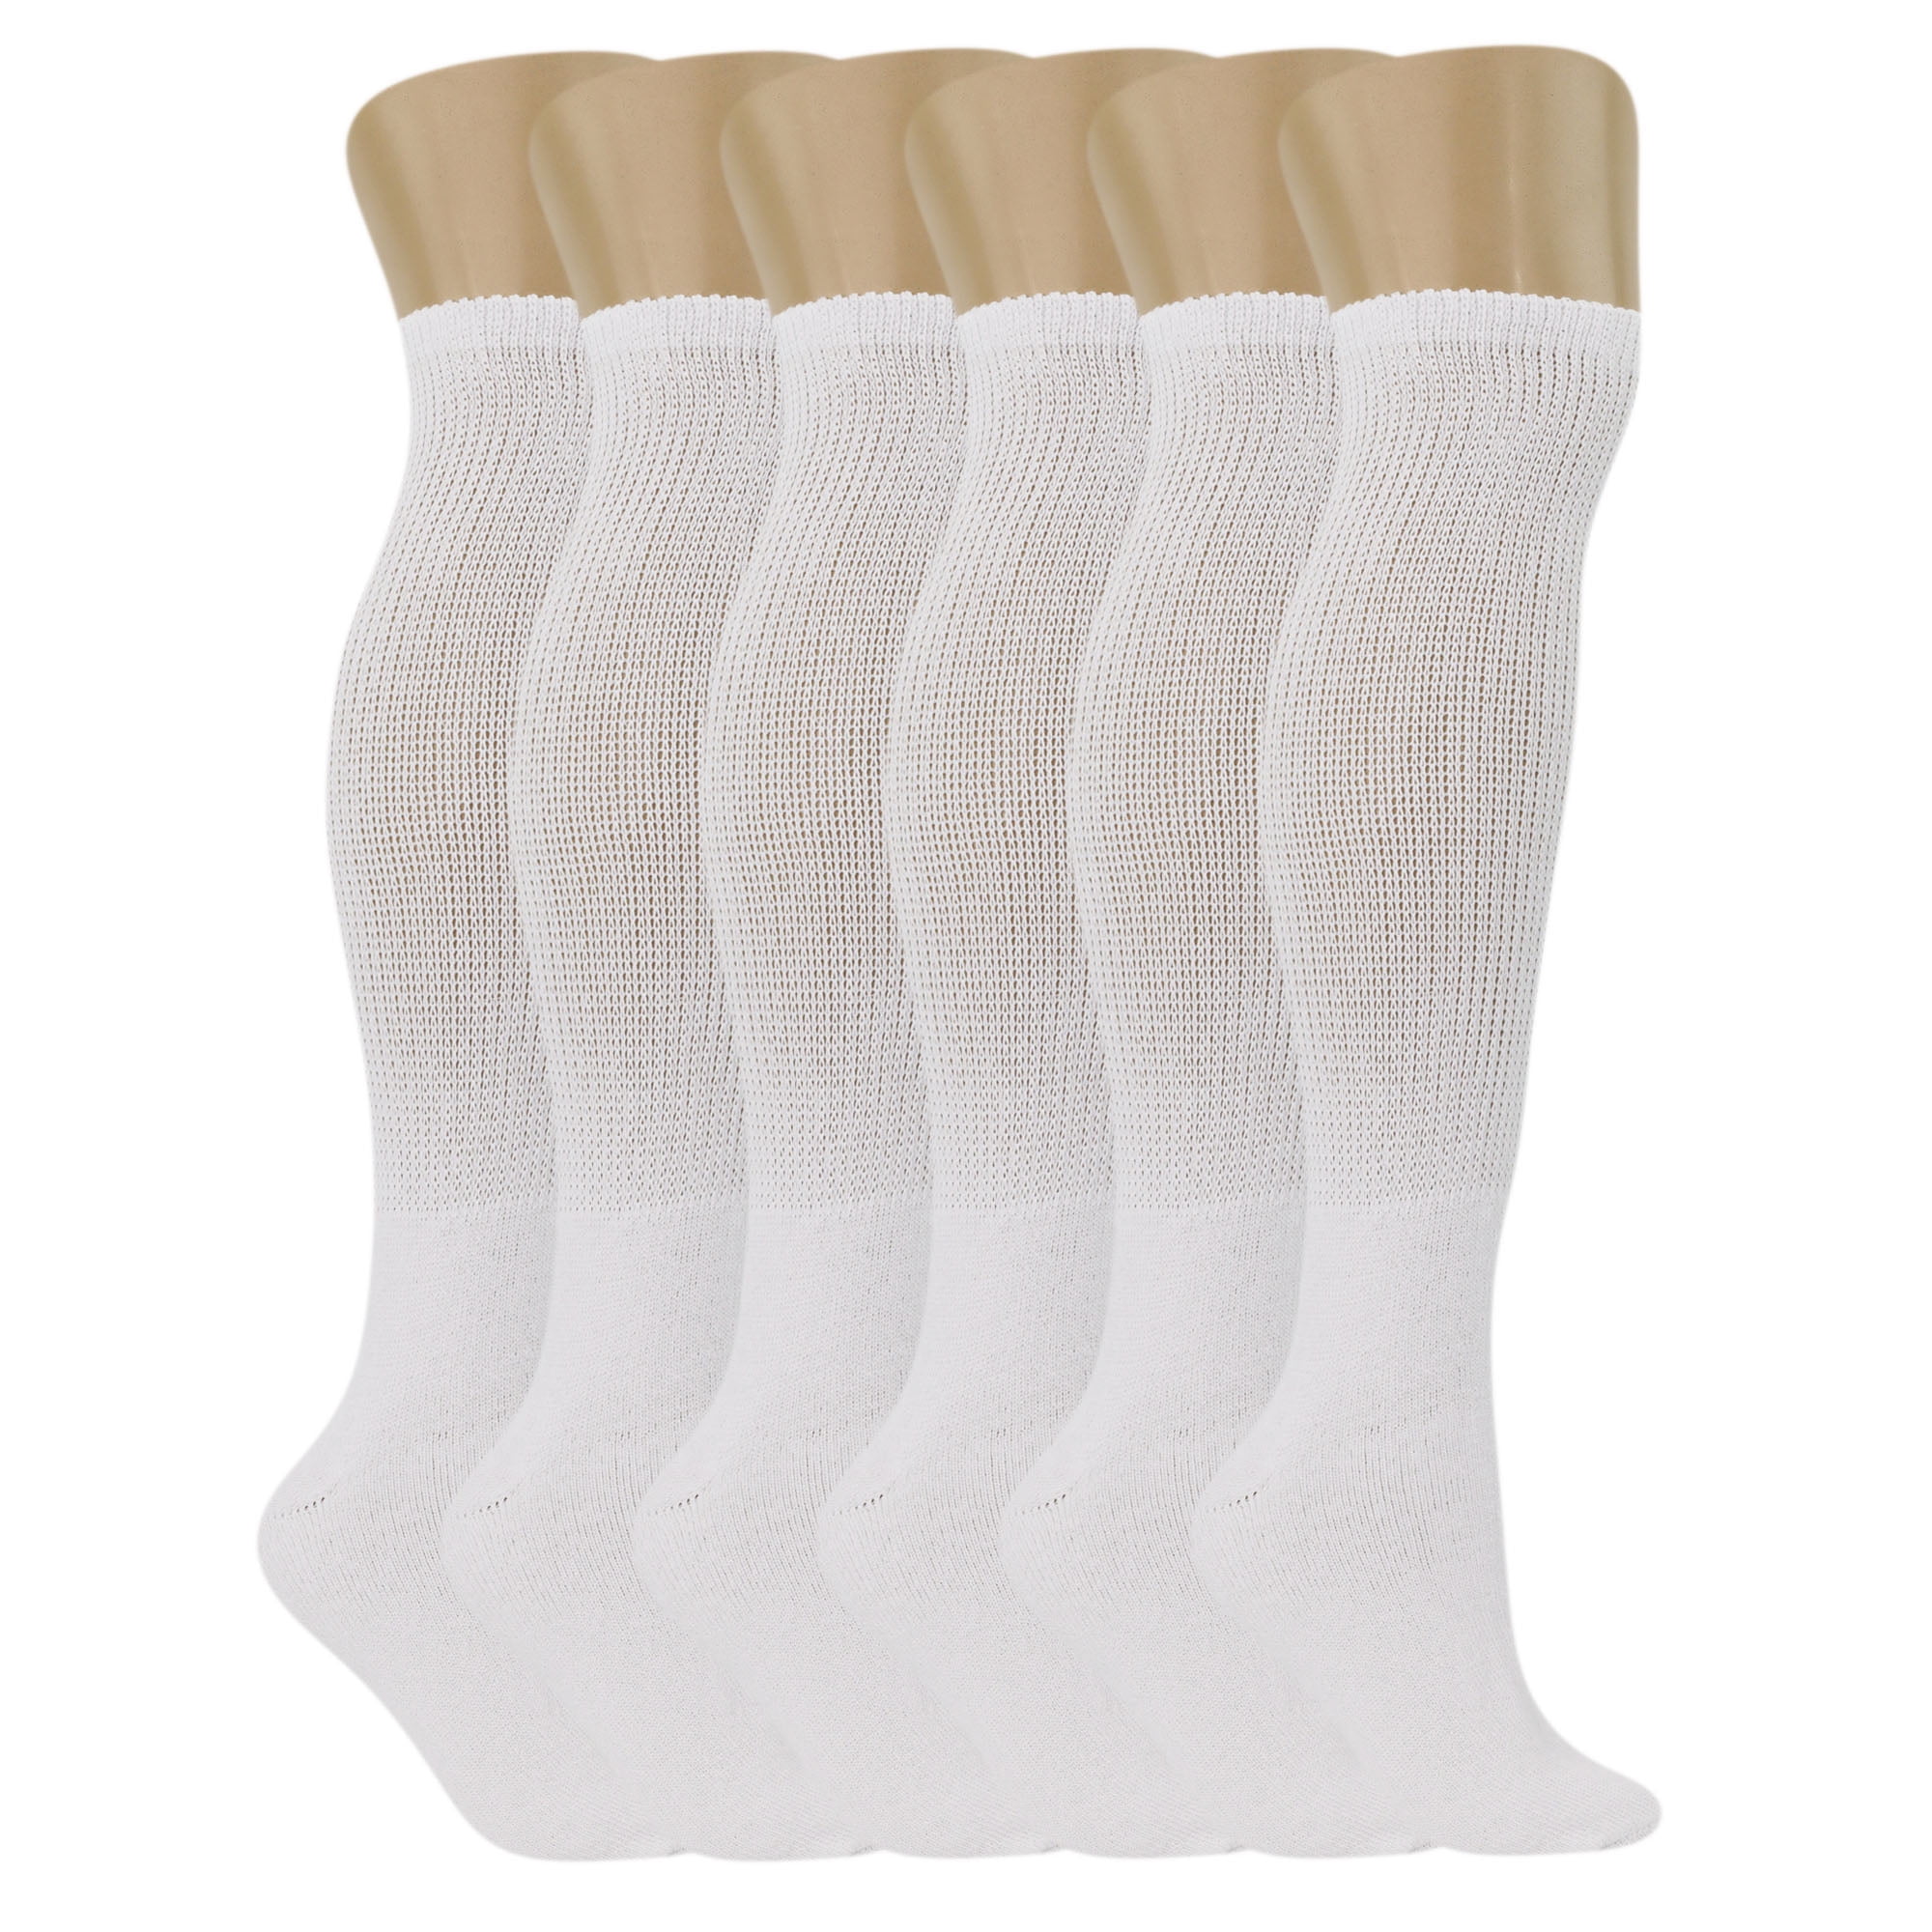 Womens Long Sport Socks Cotton Extra Soft Foodbed Stretch Logo Exercise Running 